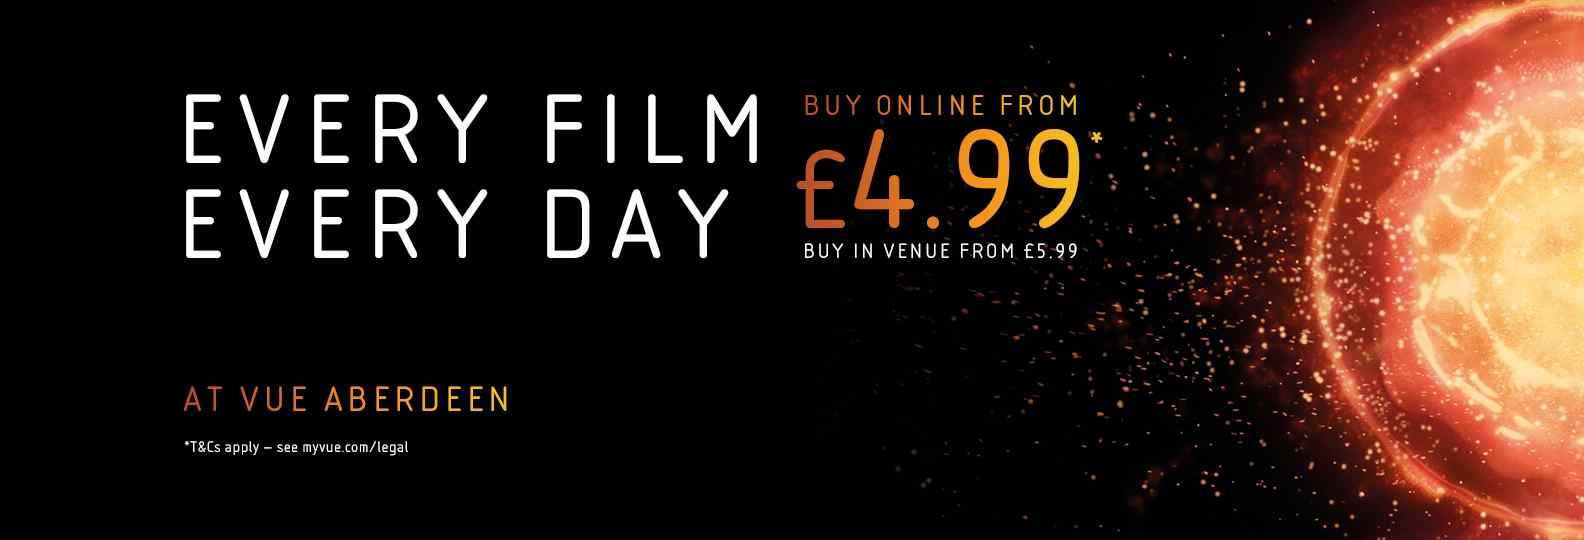 Vue Aberdeen | Every Film, Every Day from £4.99